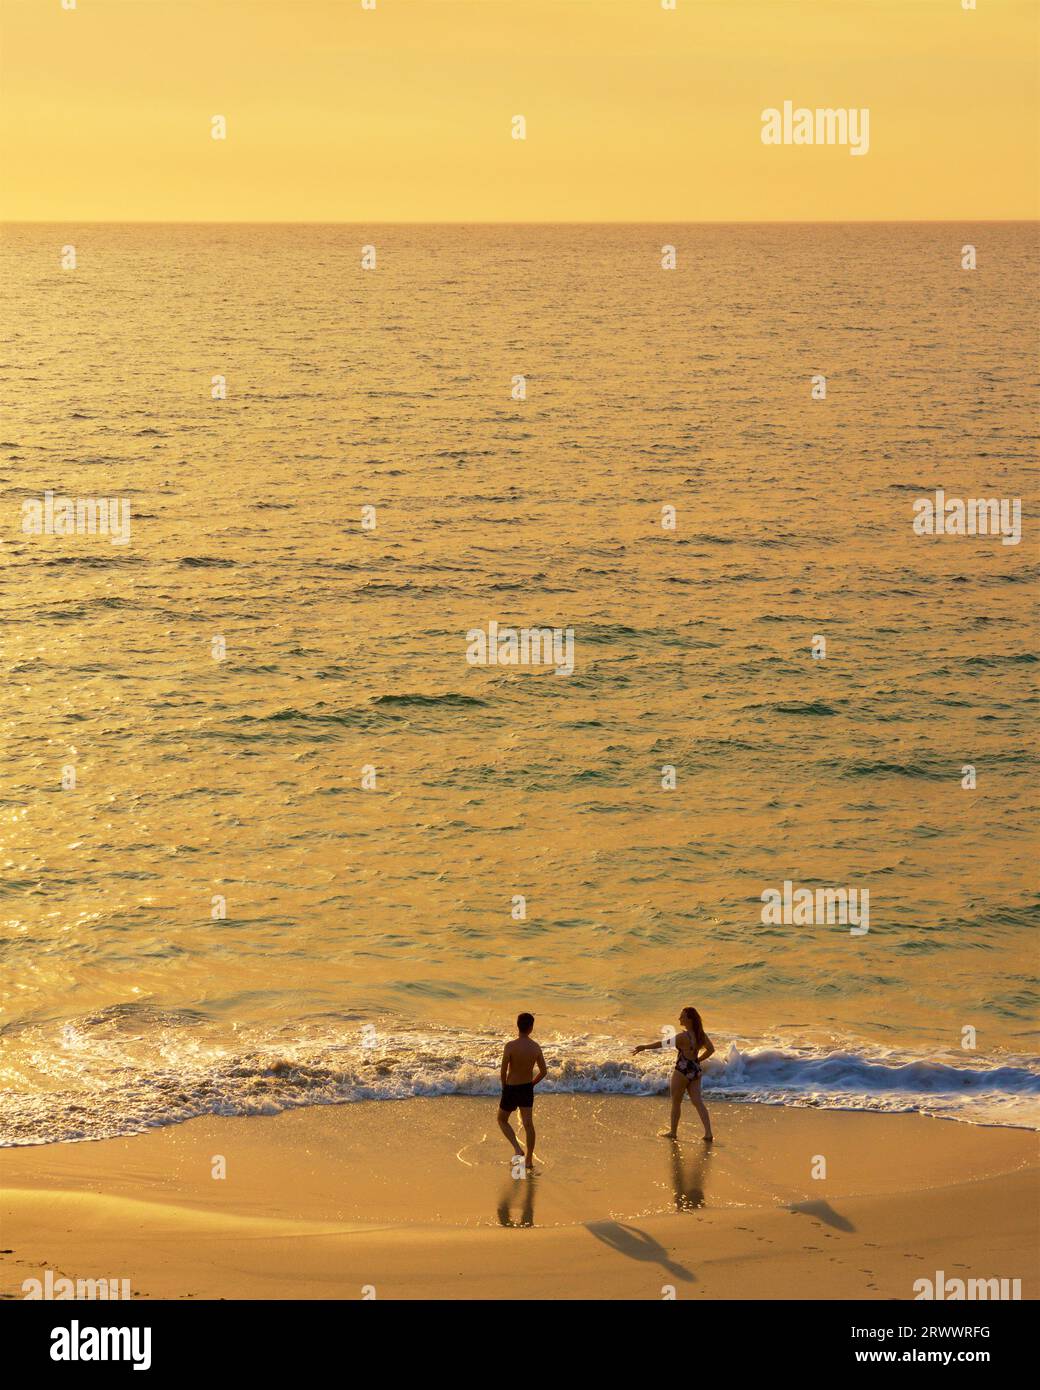 A young man and woman at the water's edge near sunset in bushfire haze conditions at North Beach in Perth, Western Australia Stock Photo